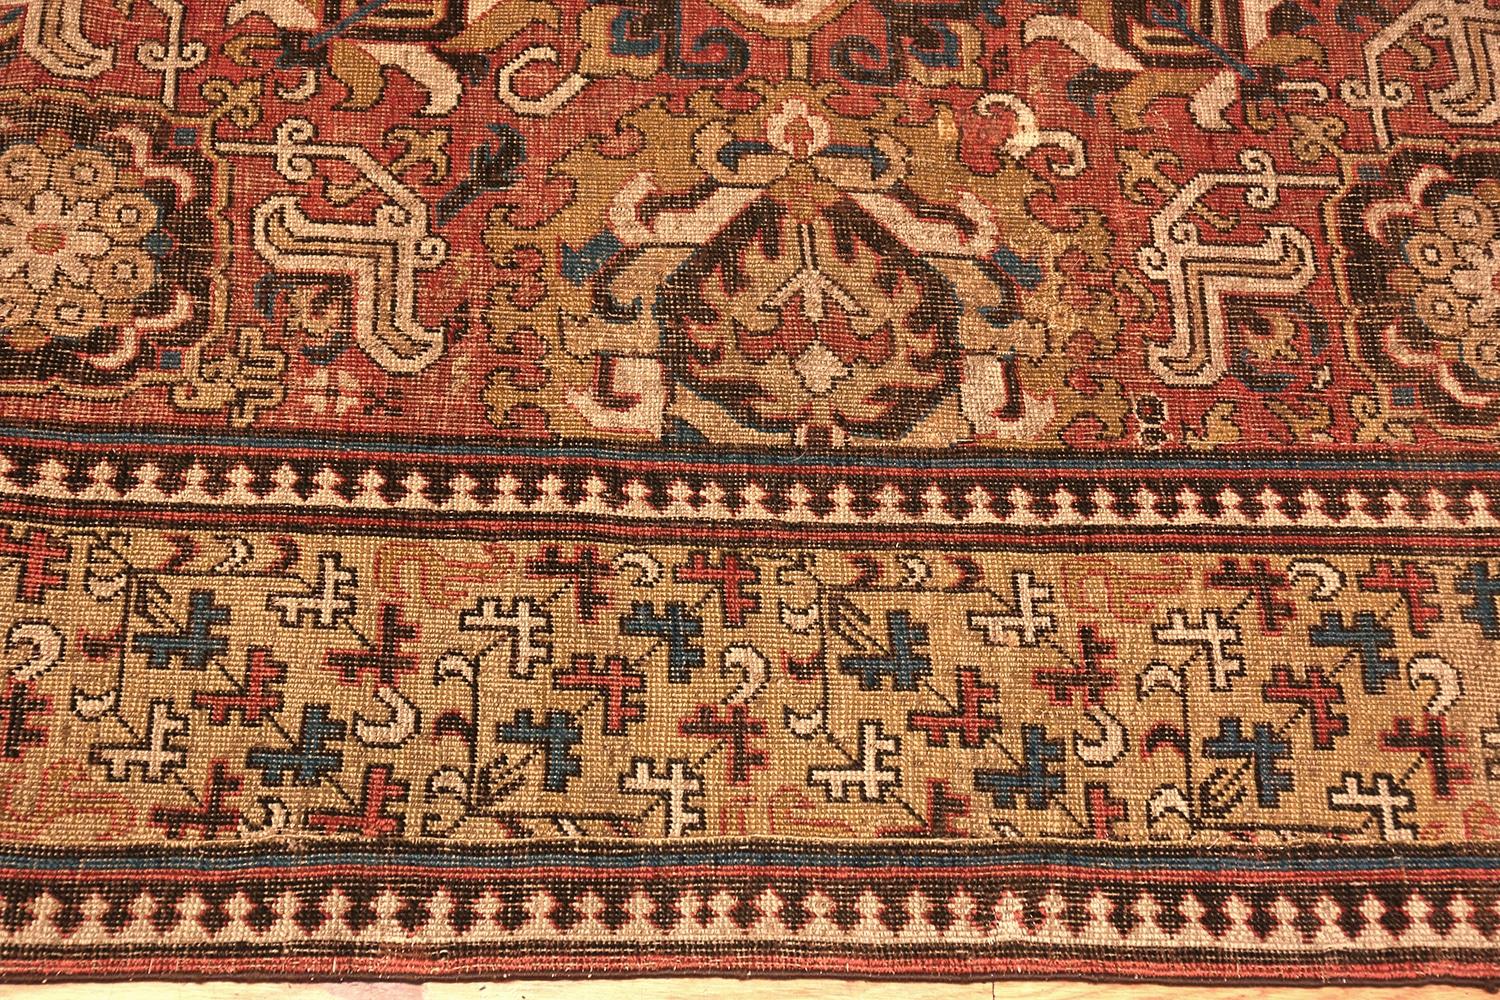 Rare and Collectible 18th Century Antique Caucasian Kuba Blossom Carpet, Country of Origin / Rug Type: Caucasian Rugs, Circa Date: Late 18th Century. Size: 6 ft 9 in x 9 ft 5 in (2.06 m x 2.87 m)

